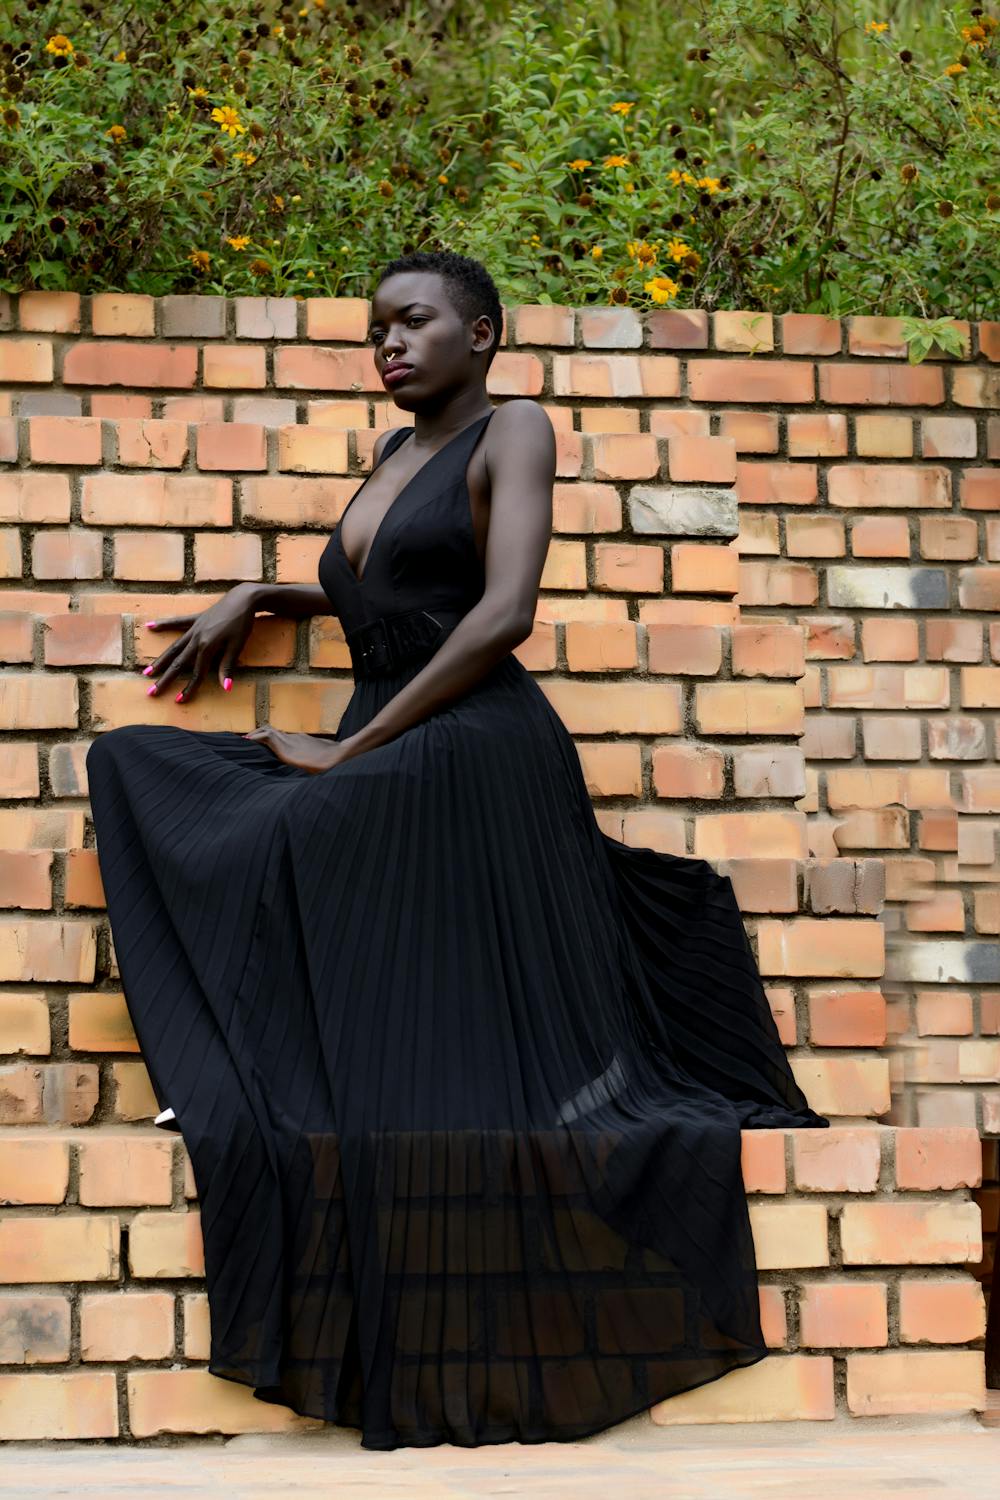 Can you wear black to weddings? Black gowns